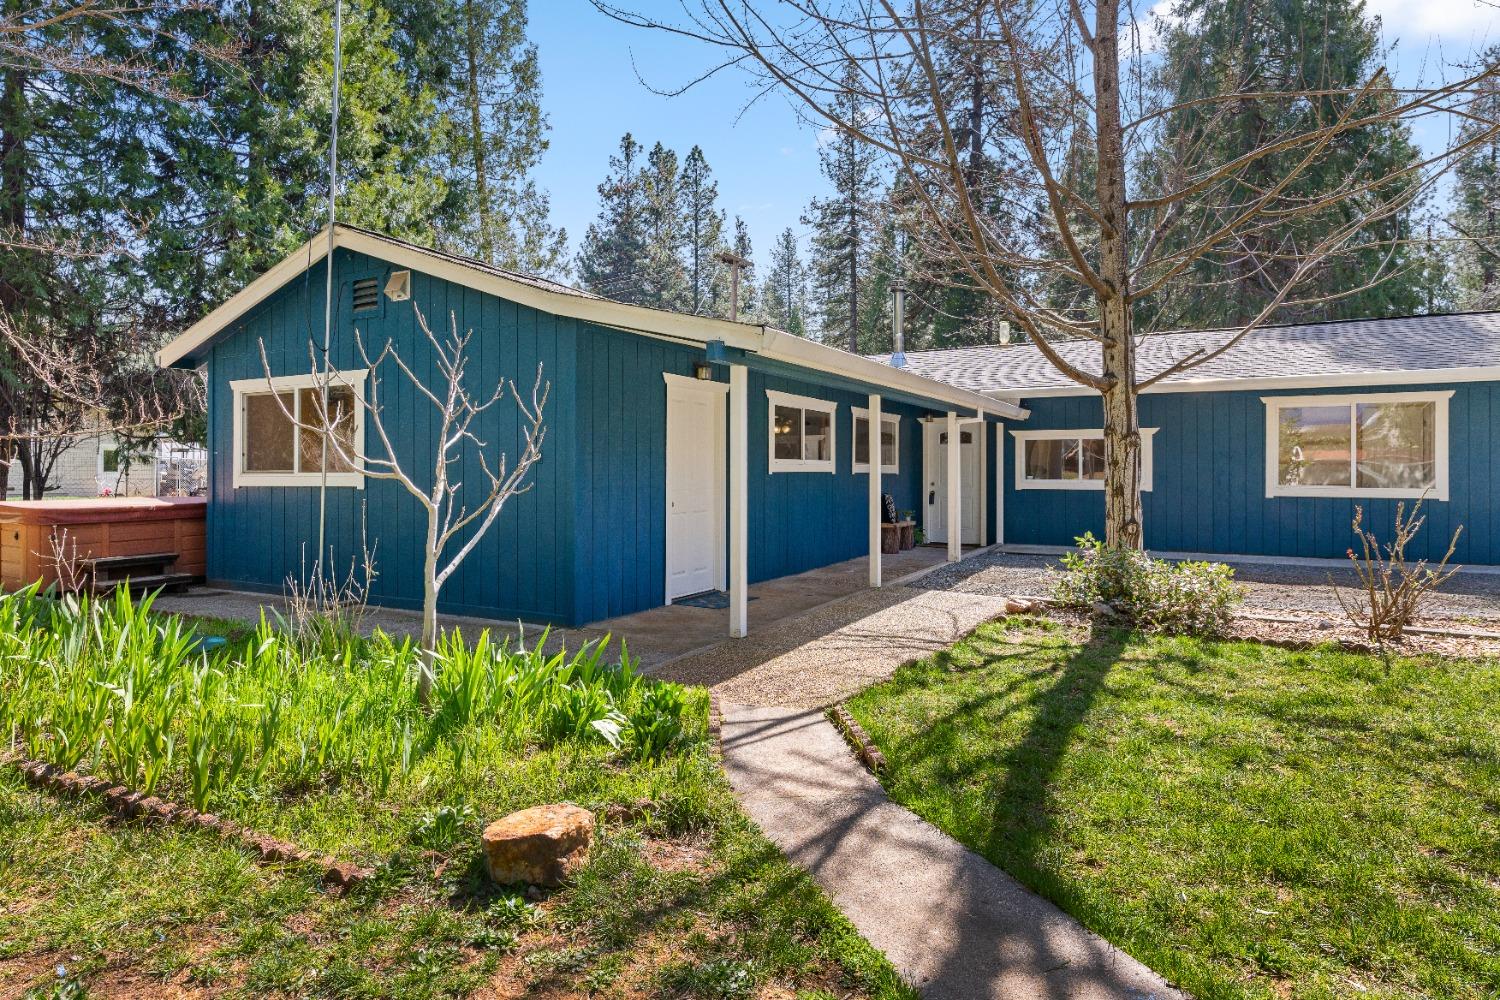 Photo of 13015 Greenhorn Rd in Grass Valley, CA